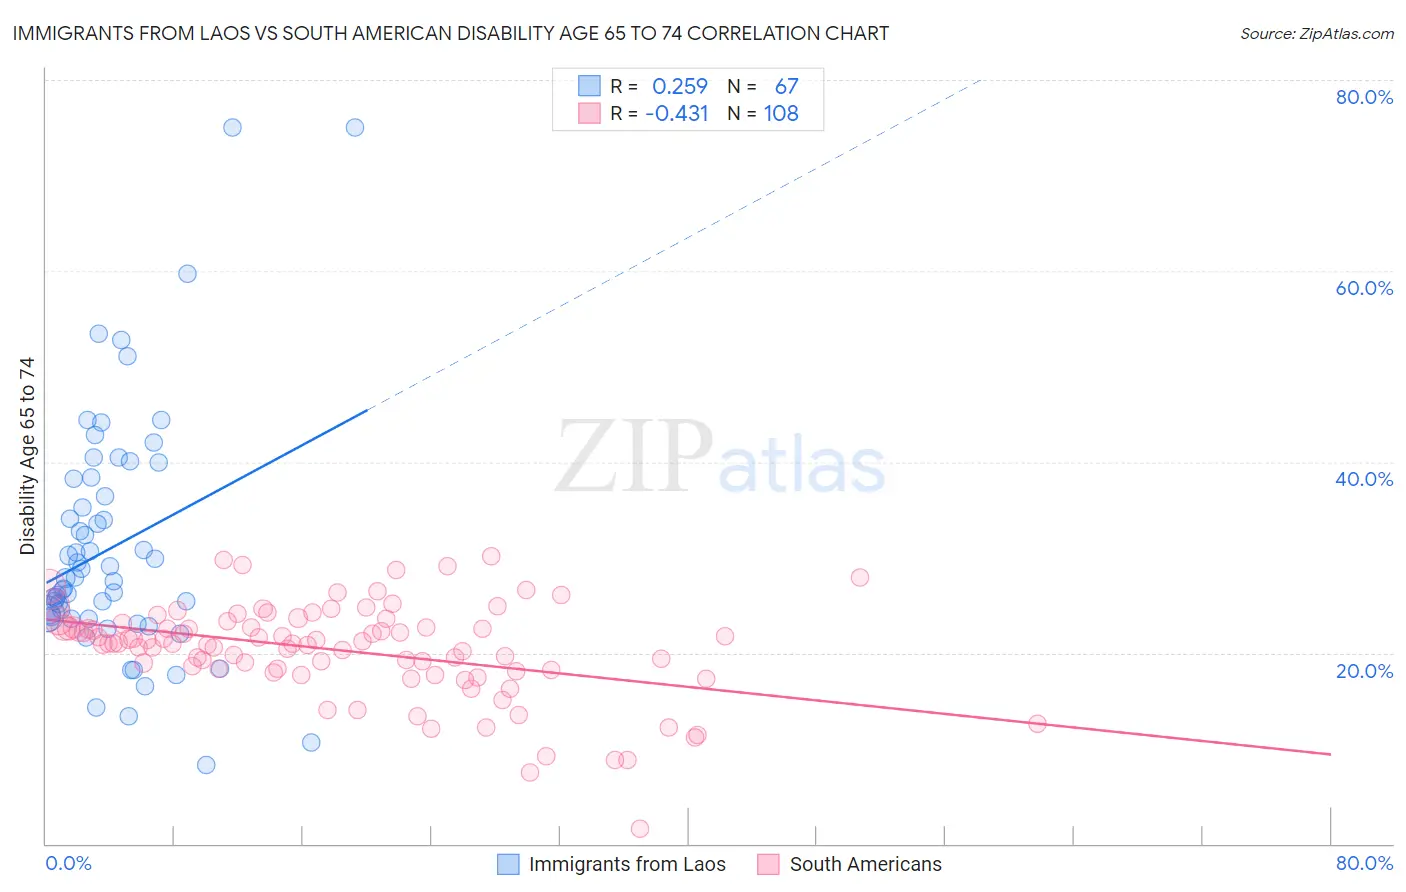 Immigrants from Laos vs South American Disability Age 65 to 74